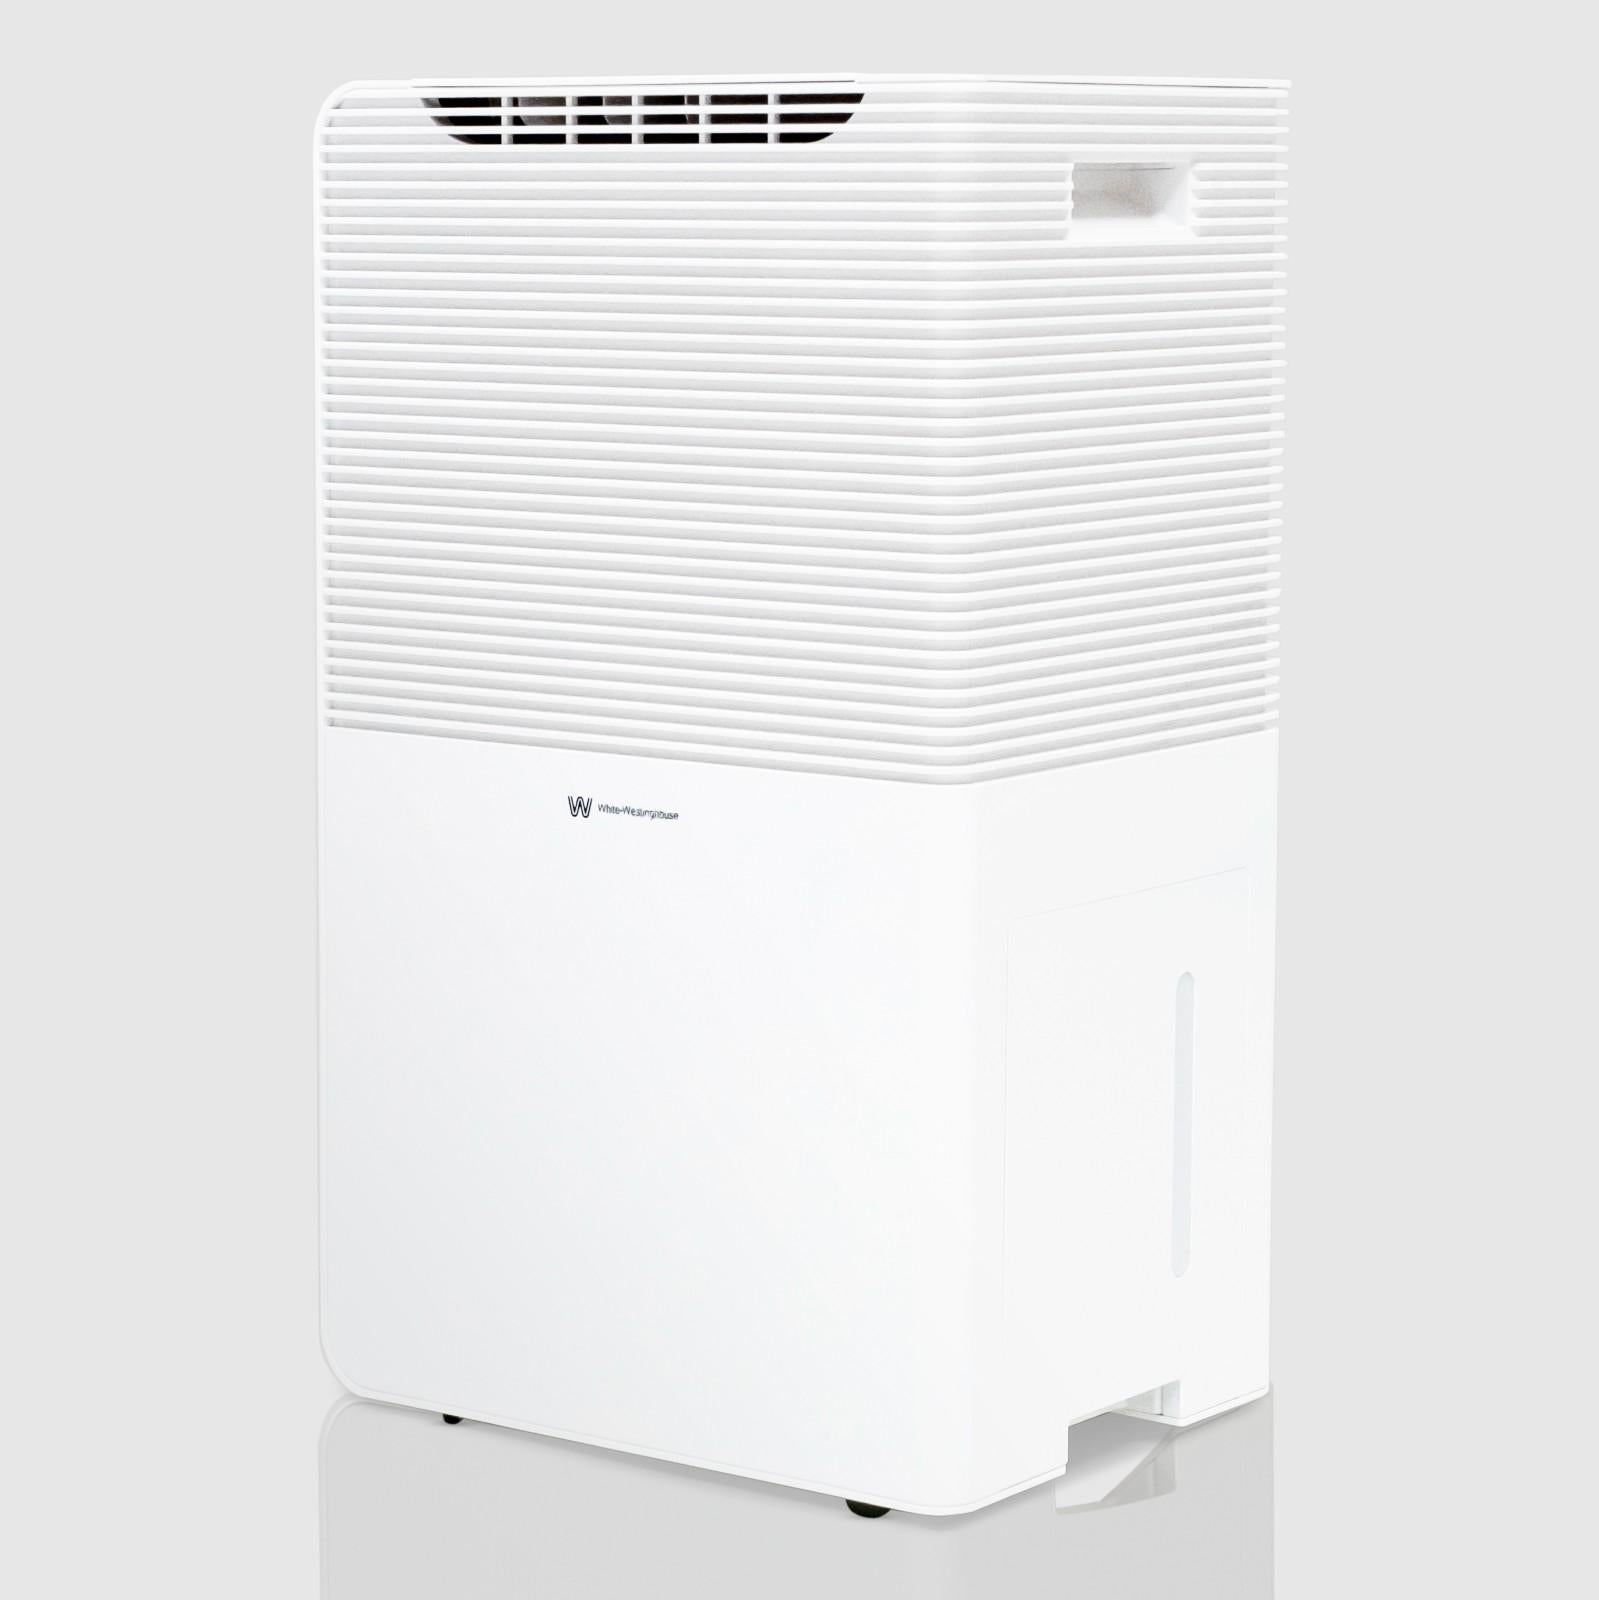 Angled view of the White Westinghouse Dehumidifier AWHD40, showcasing the sleek white design with top air vents, built-in handle, and water tank compartment. The unit's modern and compact design is suitable for maintaining optimal humidity levels in residential and commercial spaces.